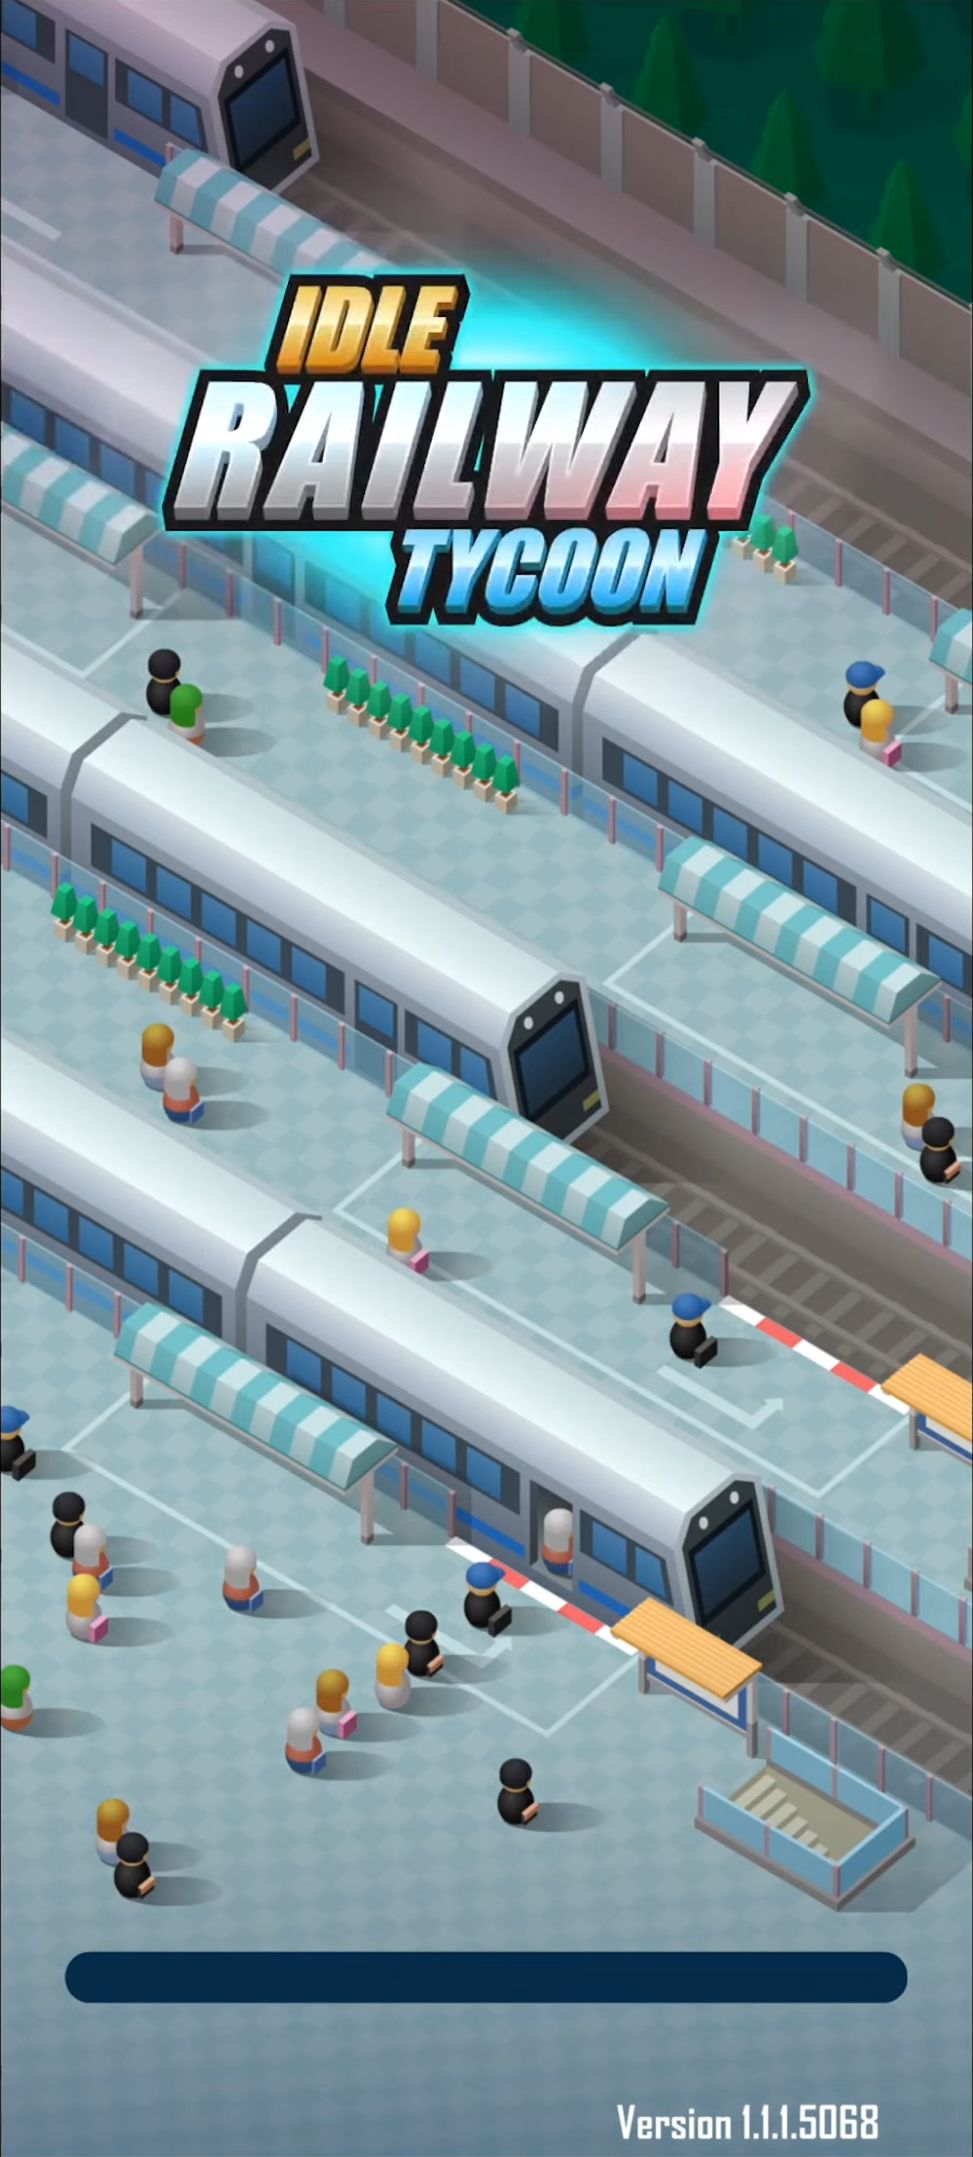 Full version of Android Clicker game apk Idle Railway Tycoon for tablet and phone.